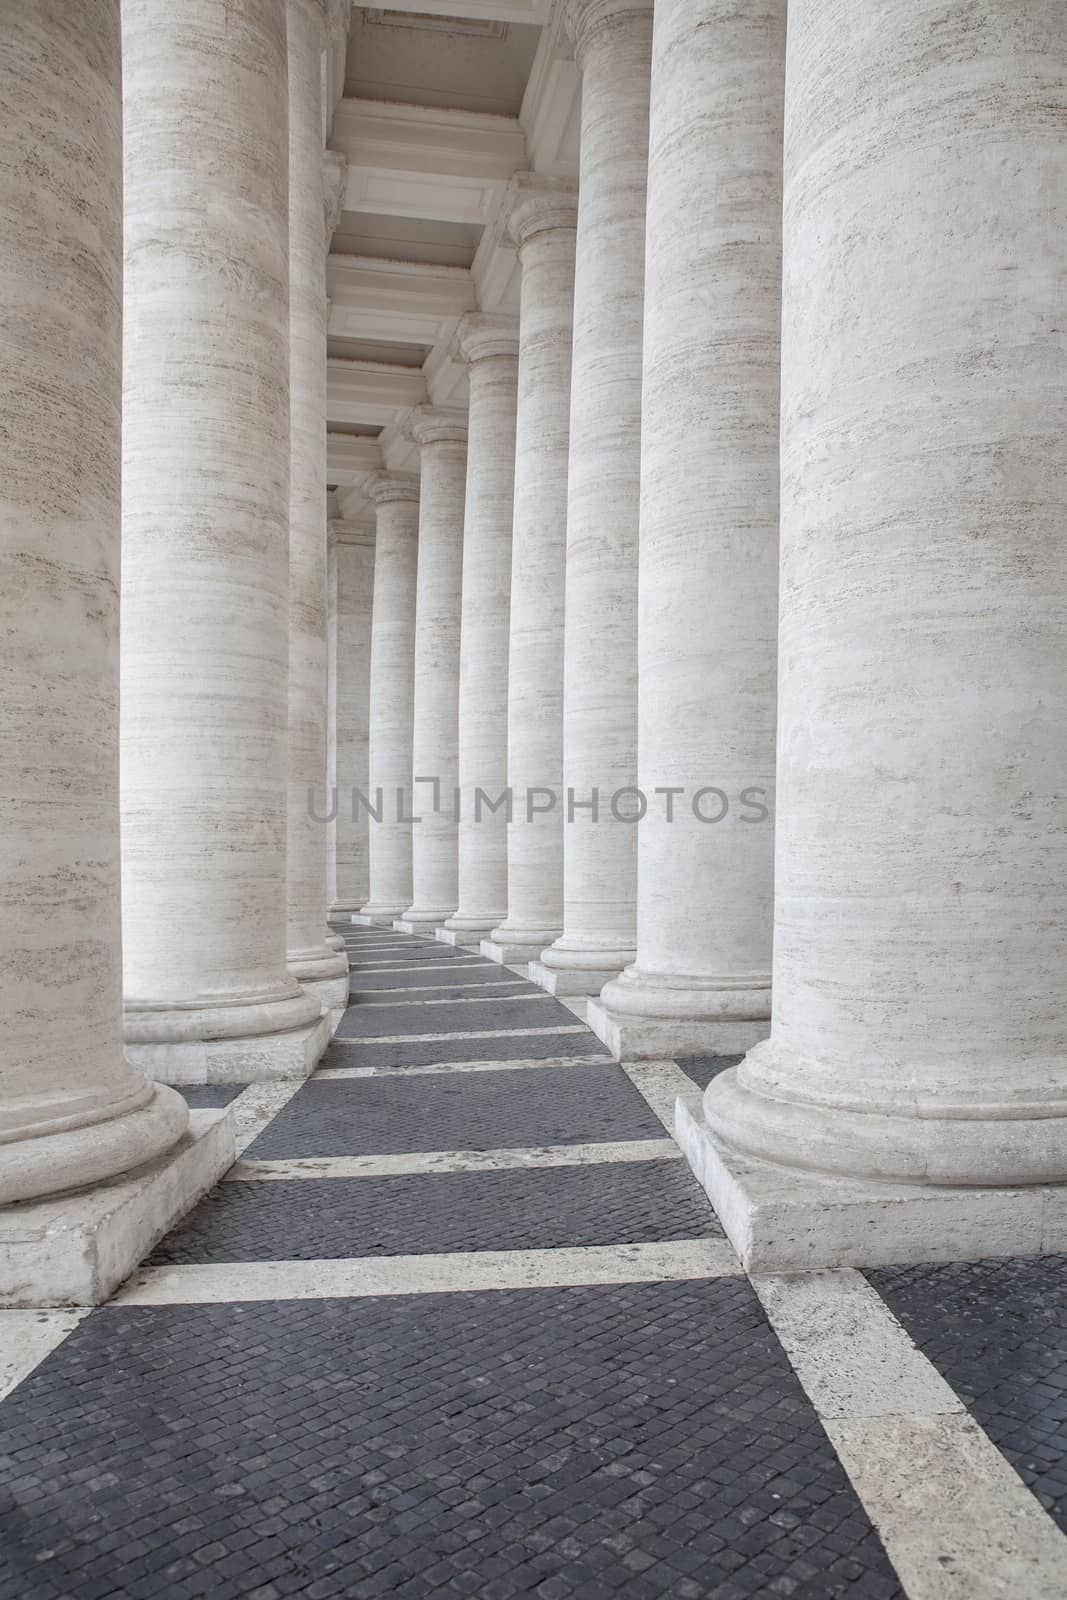 perspective of pole structure in vatican rome italy by khunaspix